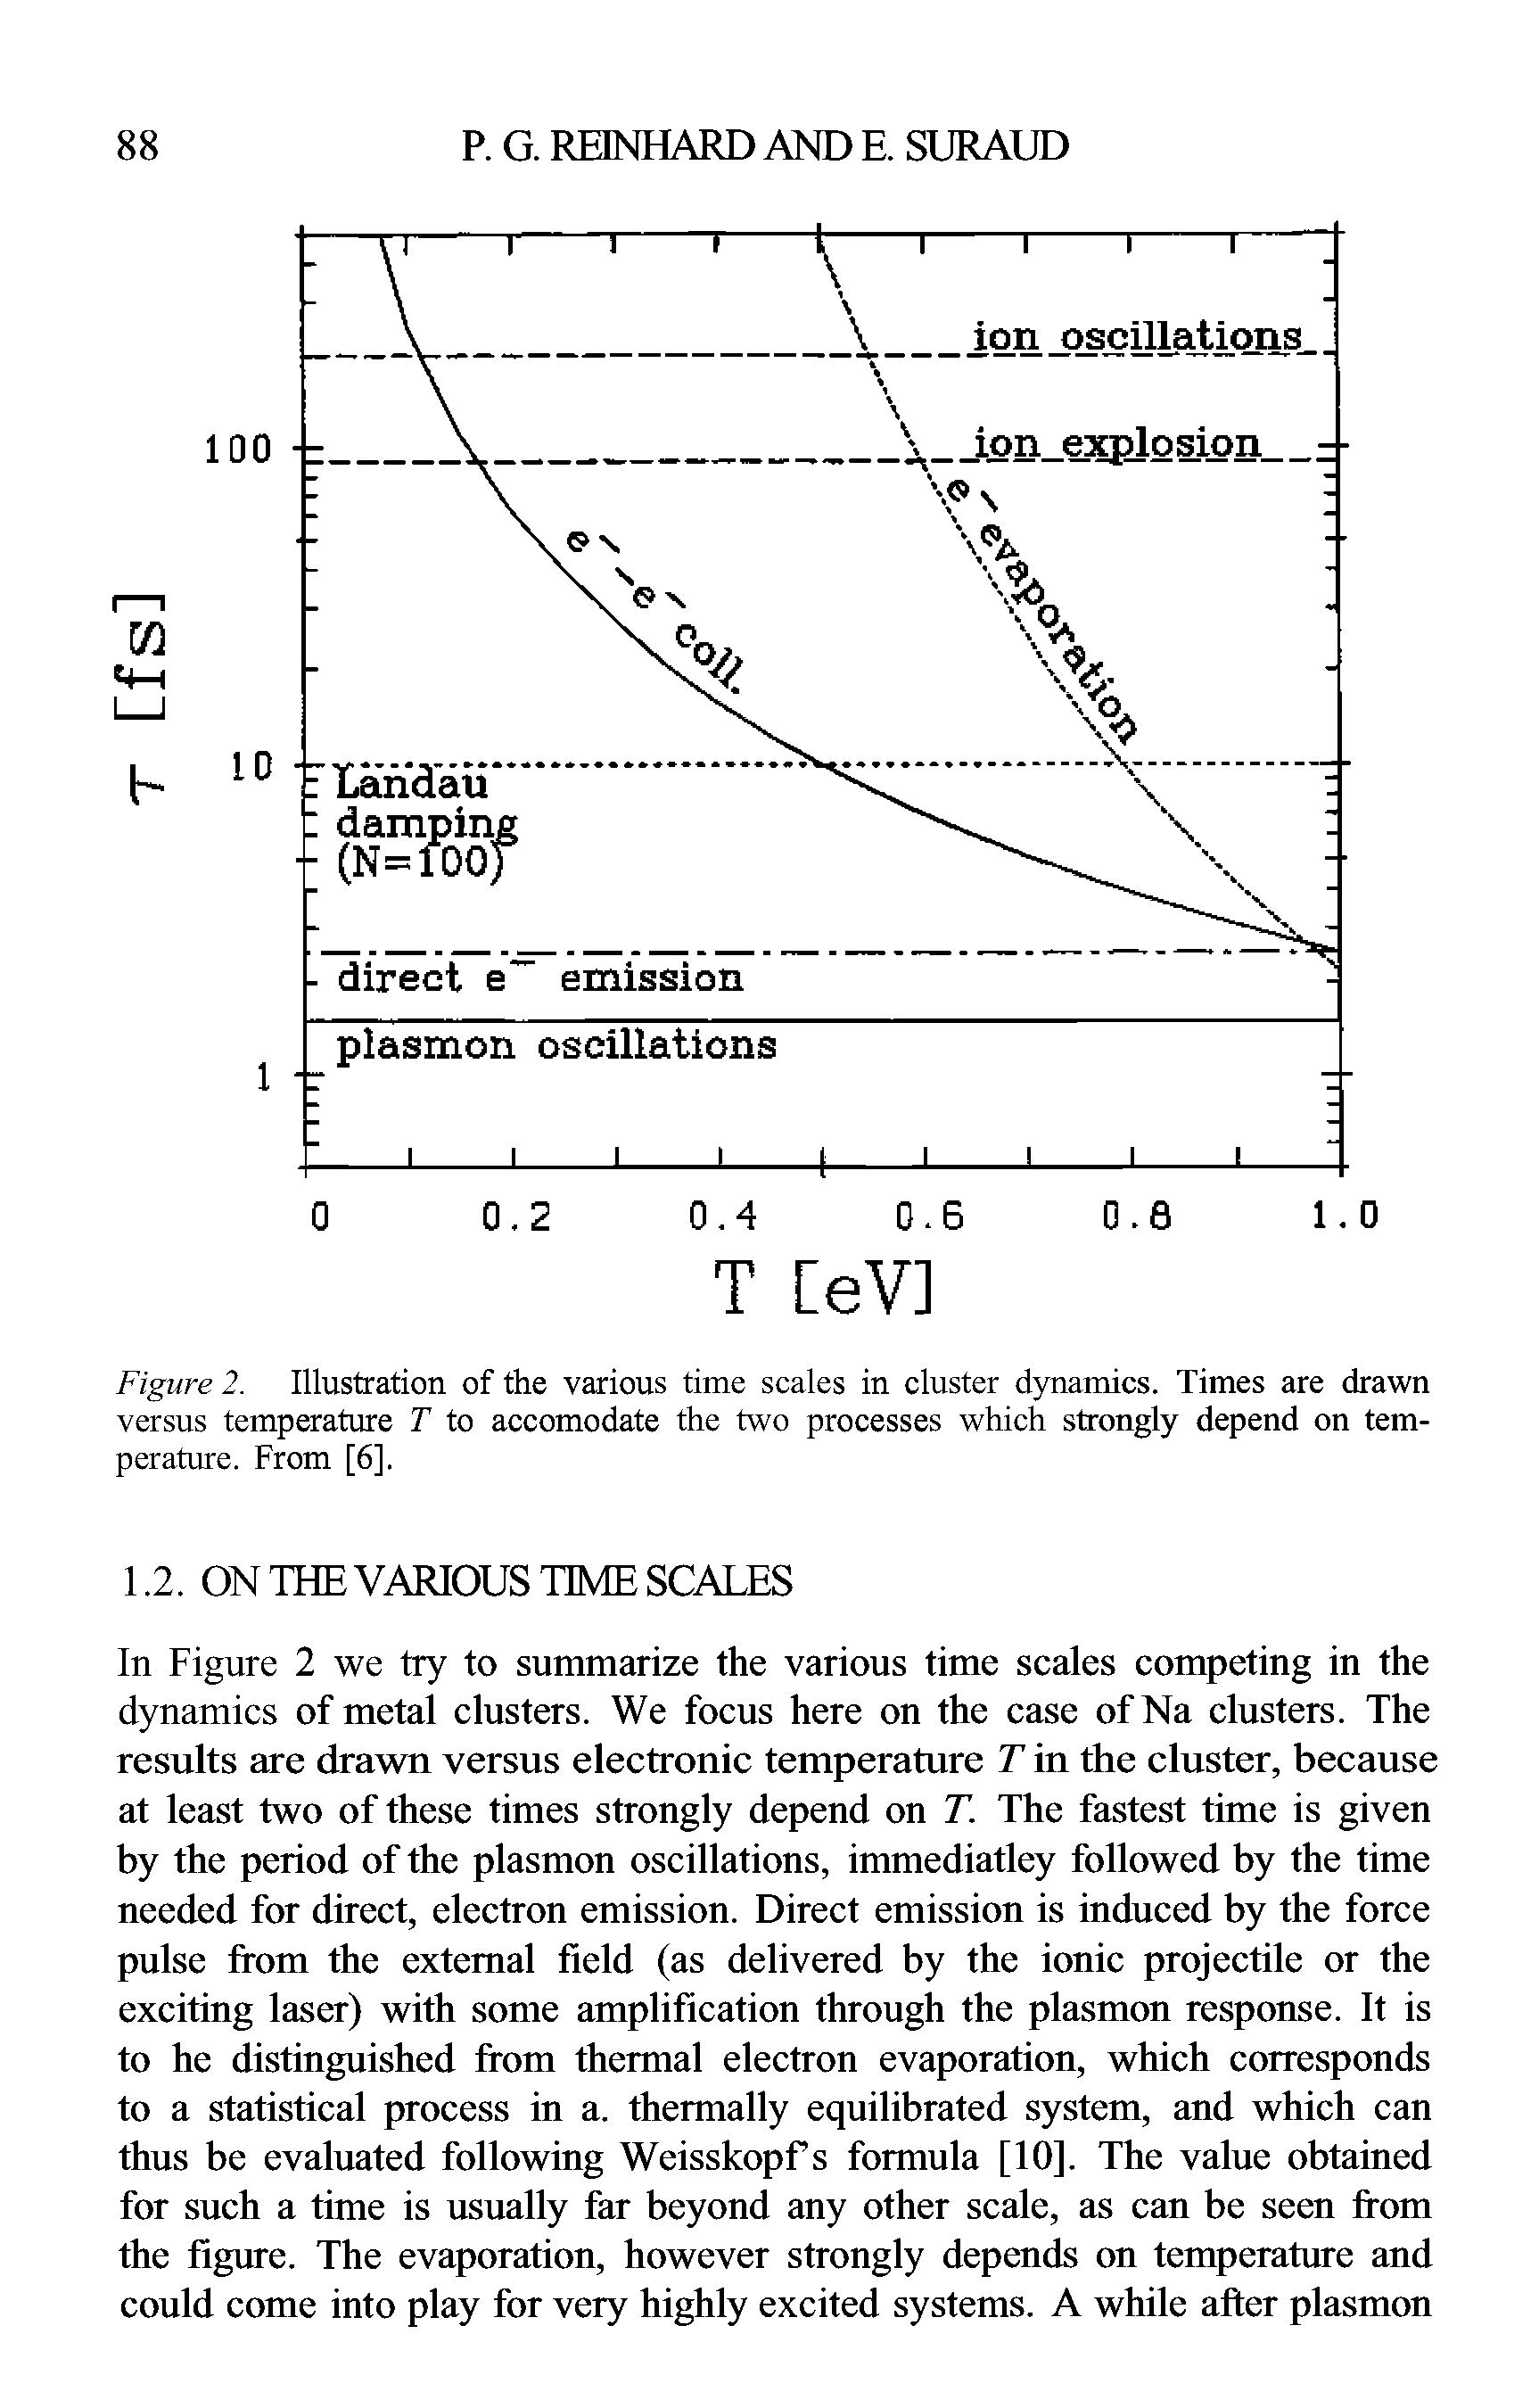 Figure 2. Illustration of the various time scales in cluster dynamics. Times are drawn versus temperature T to accomodate the two processes which strongly depend on temperature. From [6],...